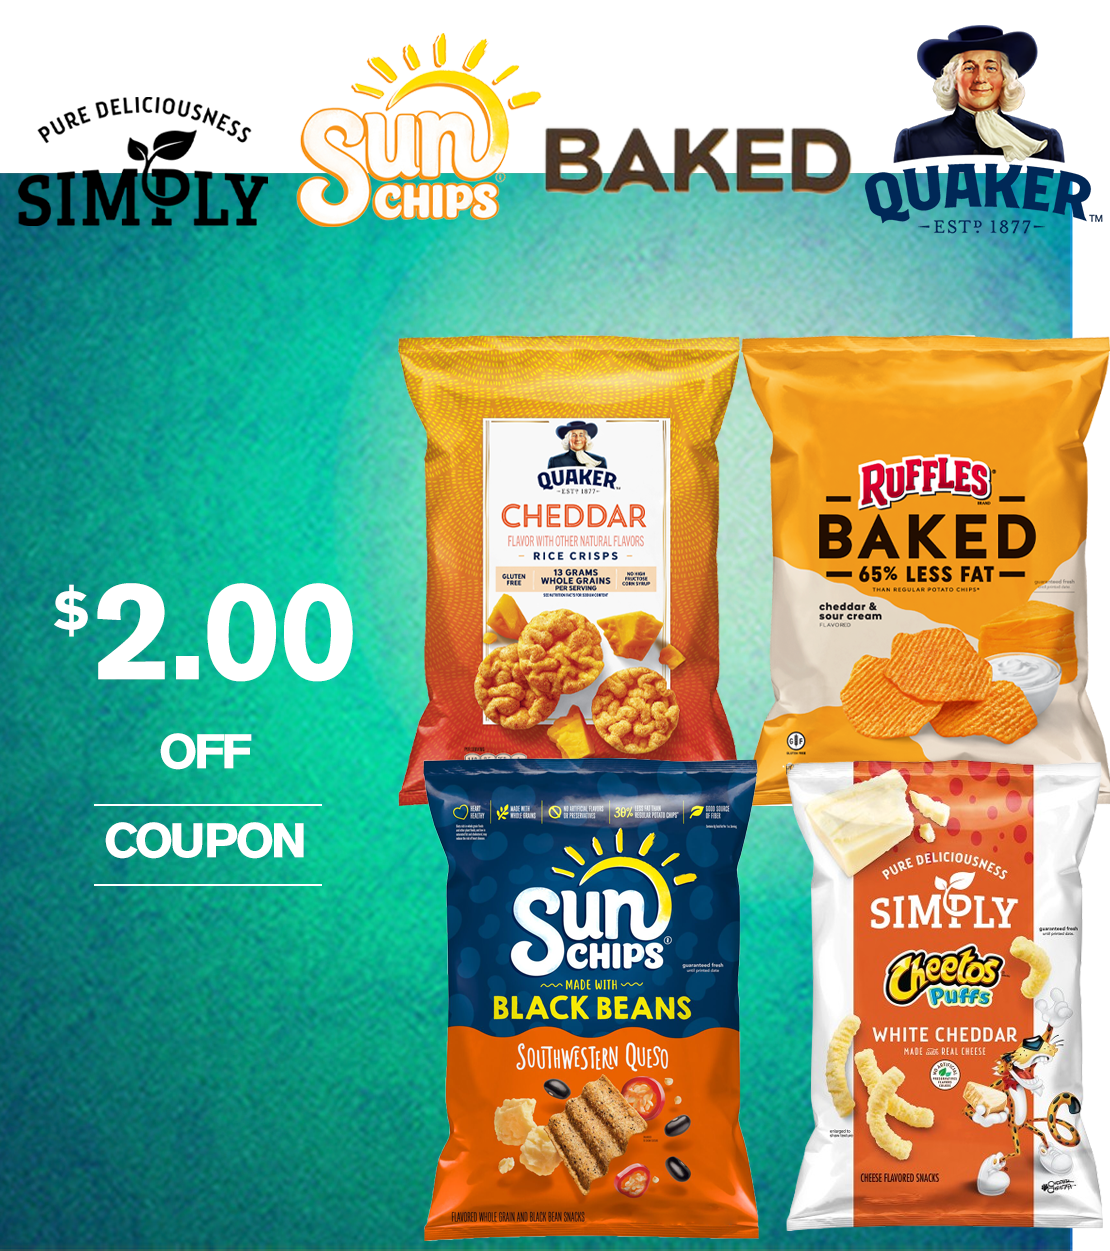 Save $2.00 Quaker, Sunchips, Simply, or Baked